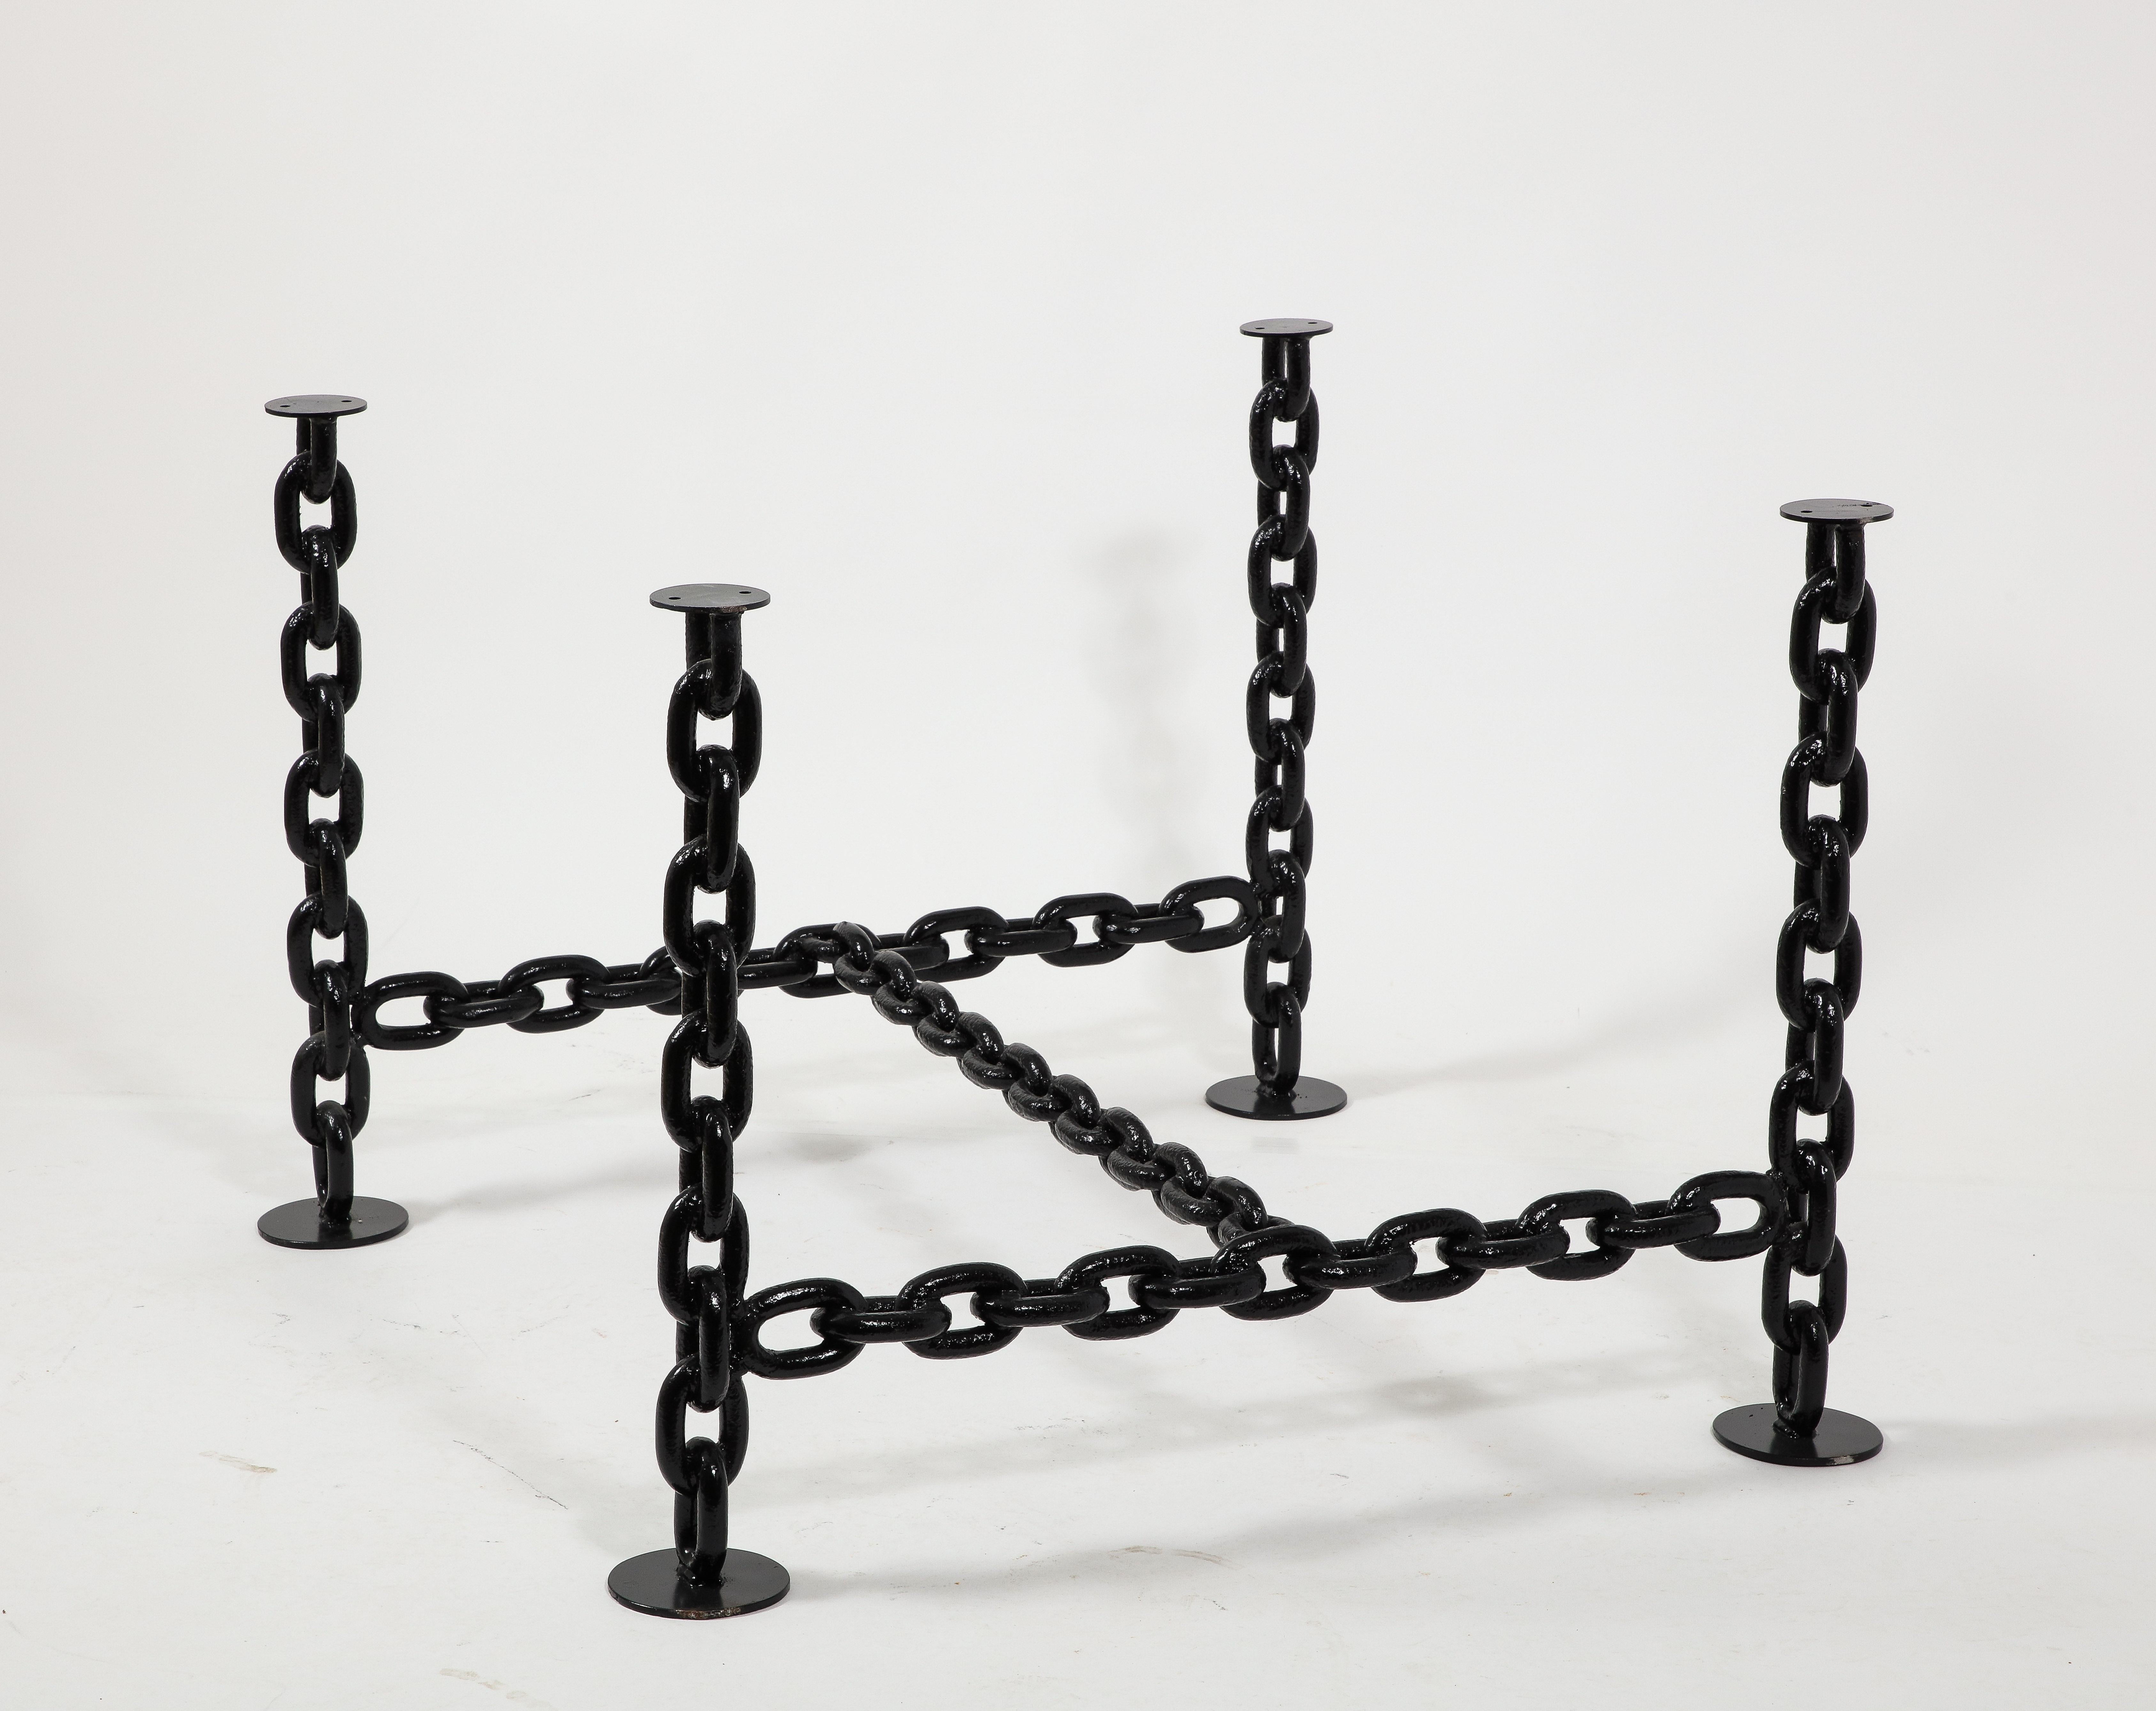 Black Lacquered Brutalist Marine Chains Dining Table Structure - France 1970s For Sale 4